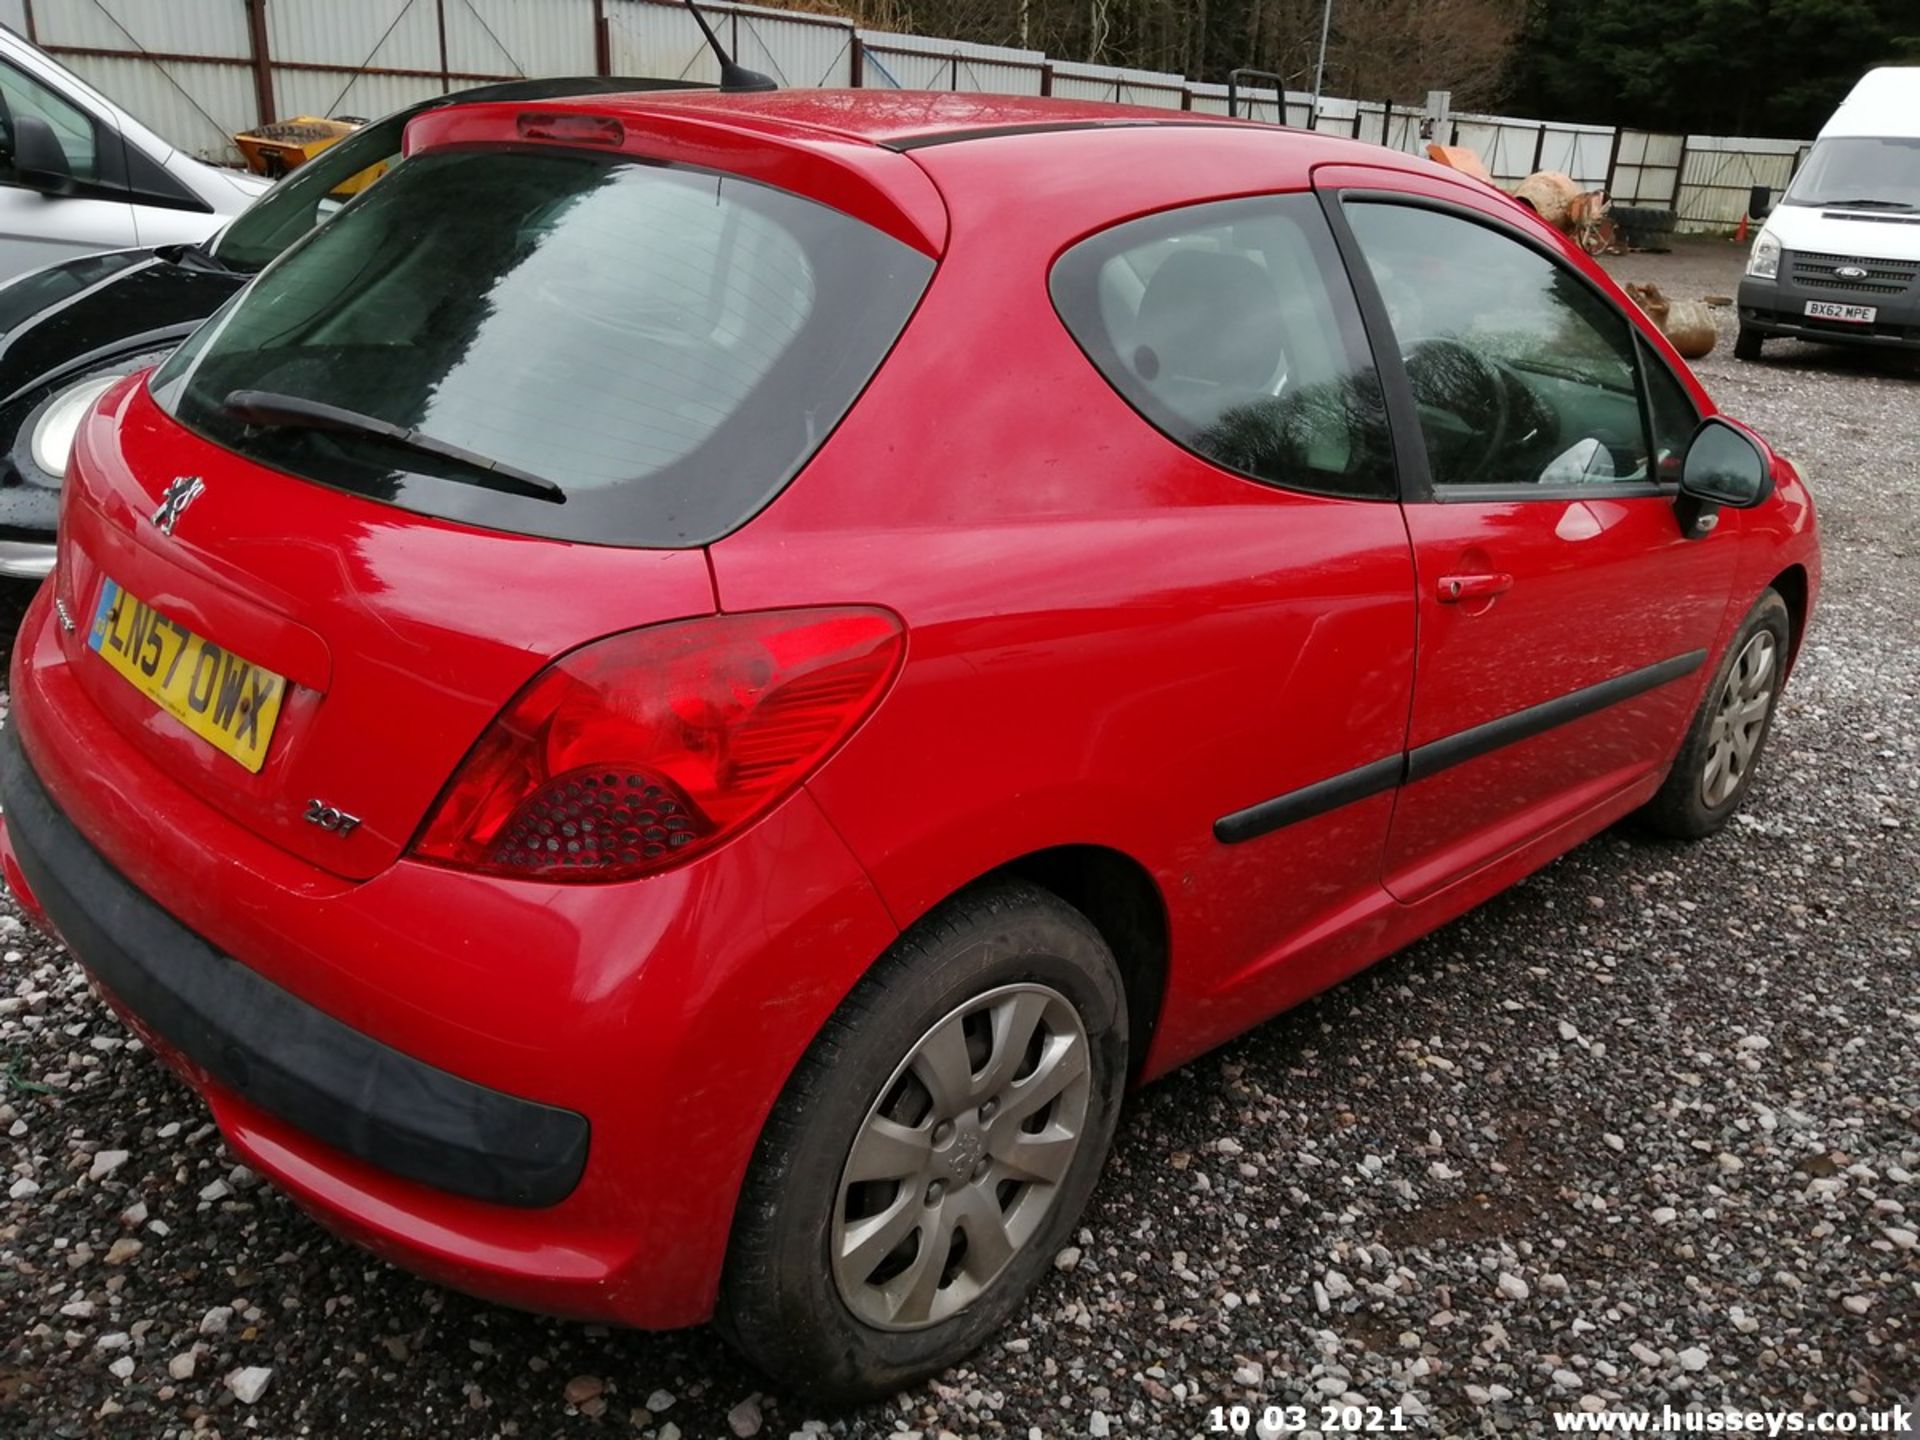 07/57 PEUGEOT 207 S HDI 67 - 1398cc 3dr Hatchback (Red) - Image 6 of 11